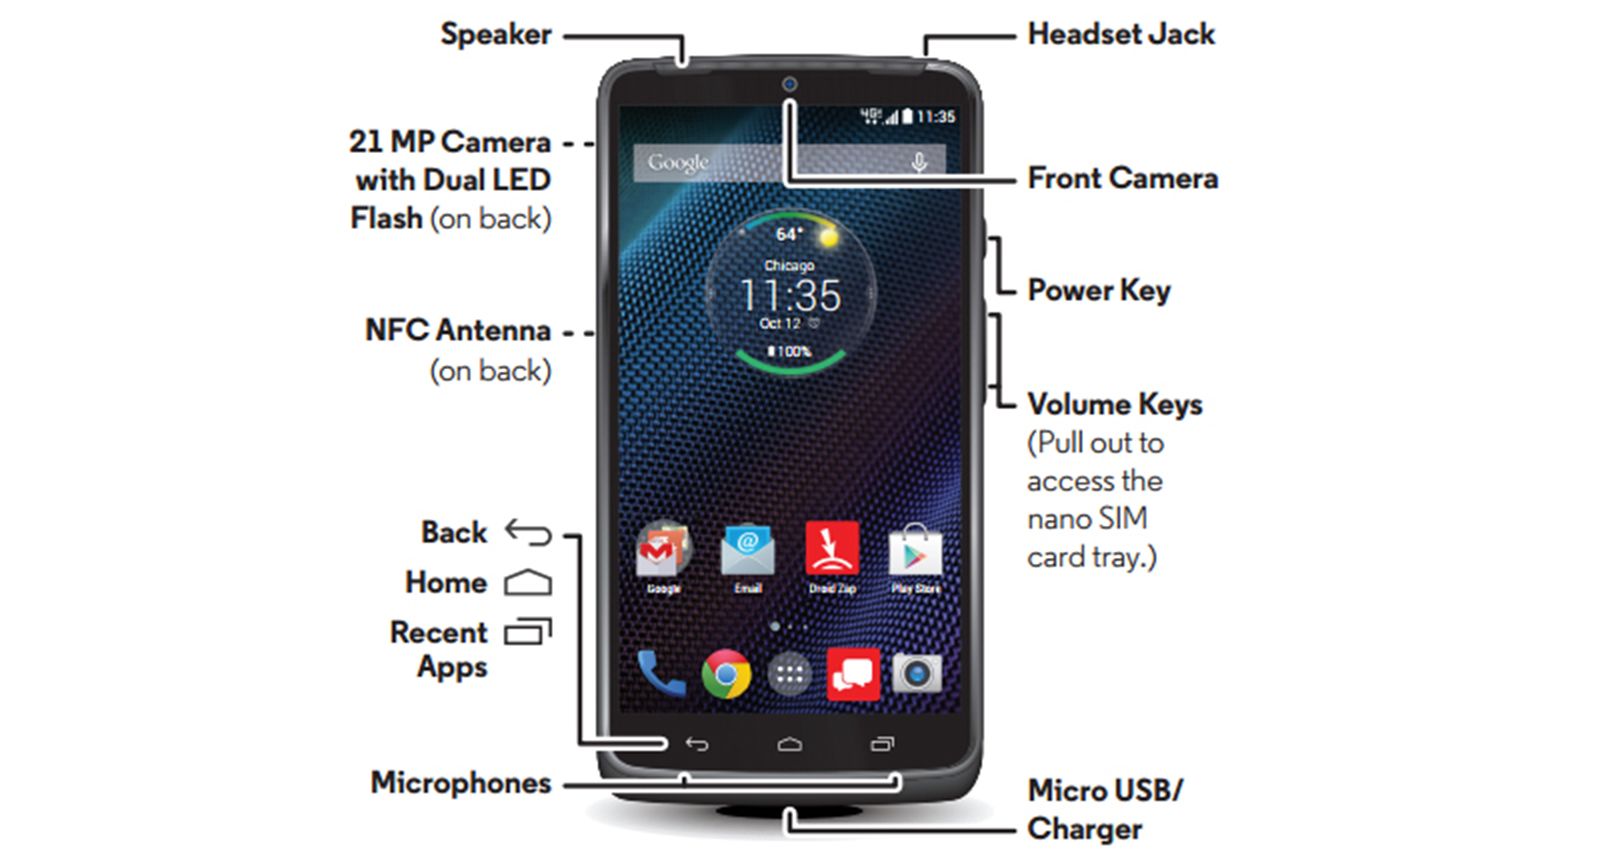 motorola droid turbo leaks with uhd screen 3gb ram 21mp camera and turbo battery charger image 1